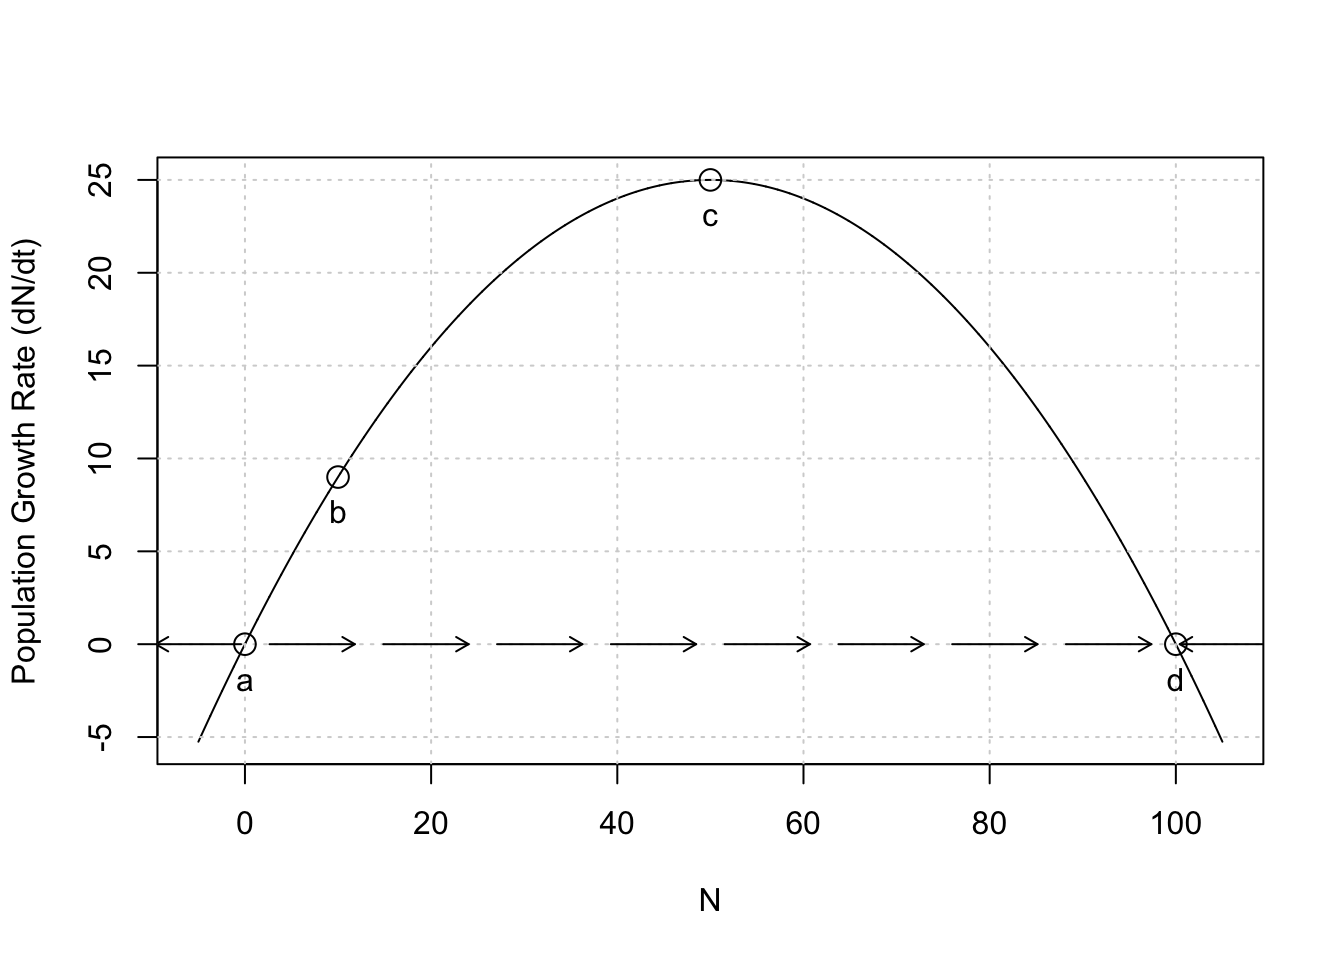 Population growth rate, $dN/dt$, as a function of $N$. This kind of graph is called a phase portrait or phase plane. Points a--e are labelled for convenience. At values of $N$ associated with points $a$ and $d$, population growth rate equals zero. At values of $N$ associated with $b$ and $c$ growth rate is positive, and for $e$ growth rate is negative. Note this is growth rate as a function of $N$ (time is not explicitly part of this graph).